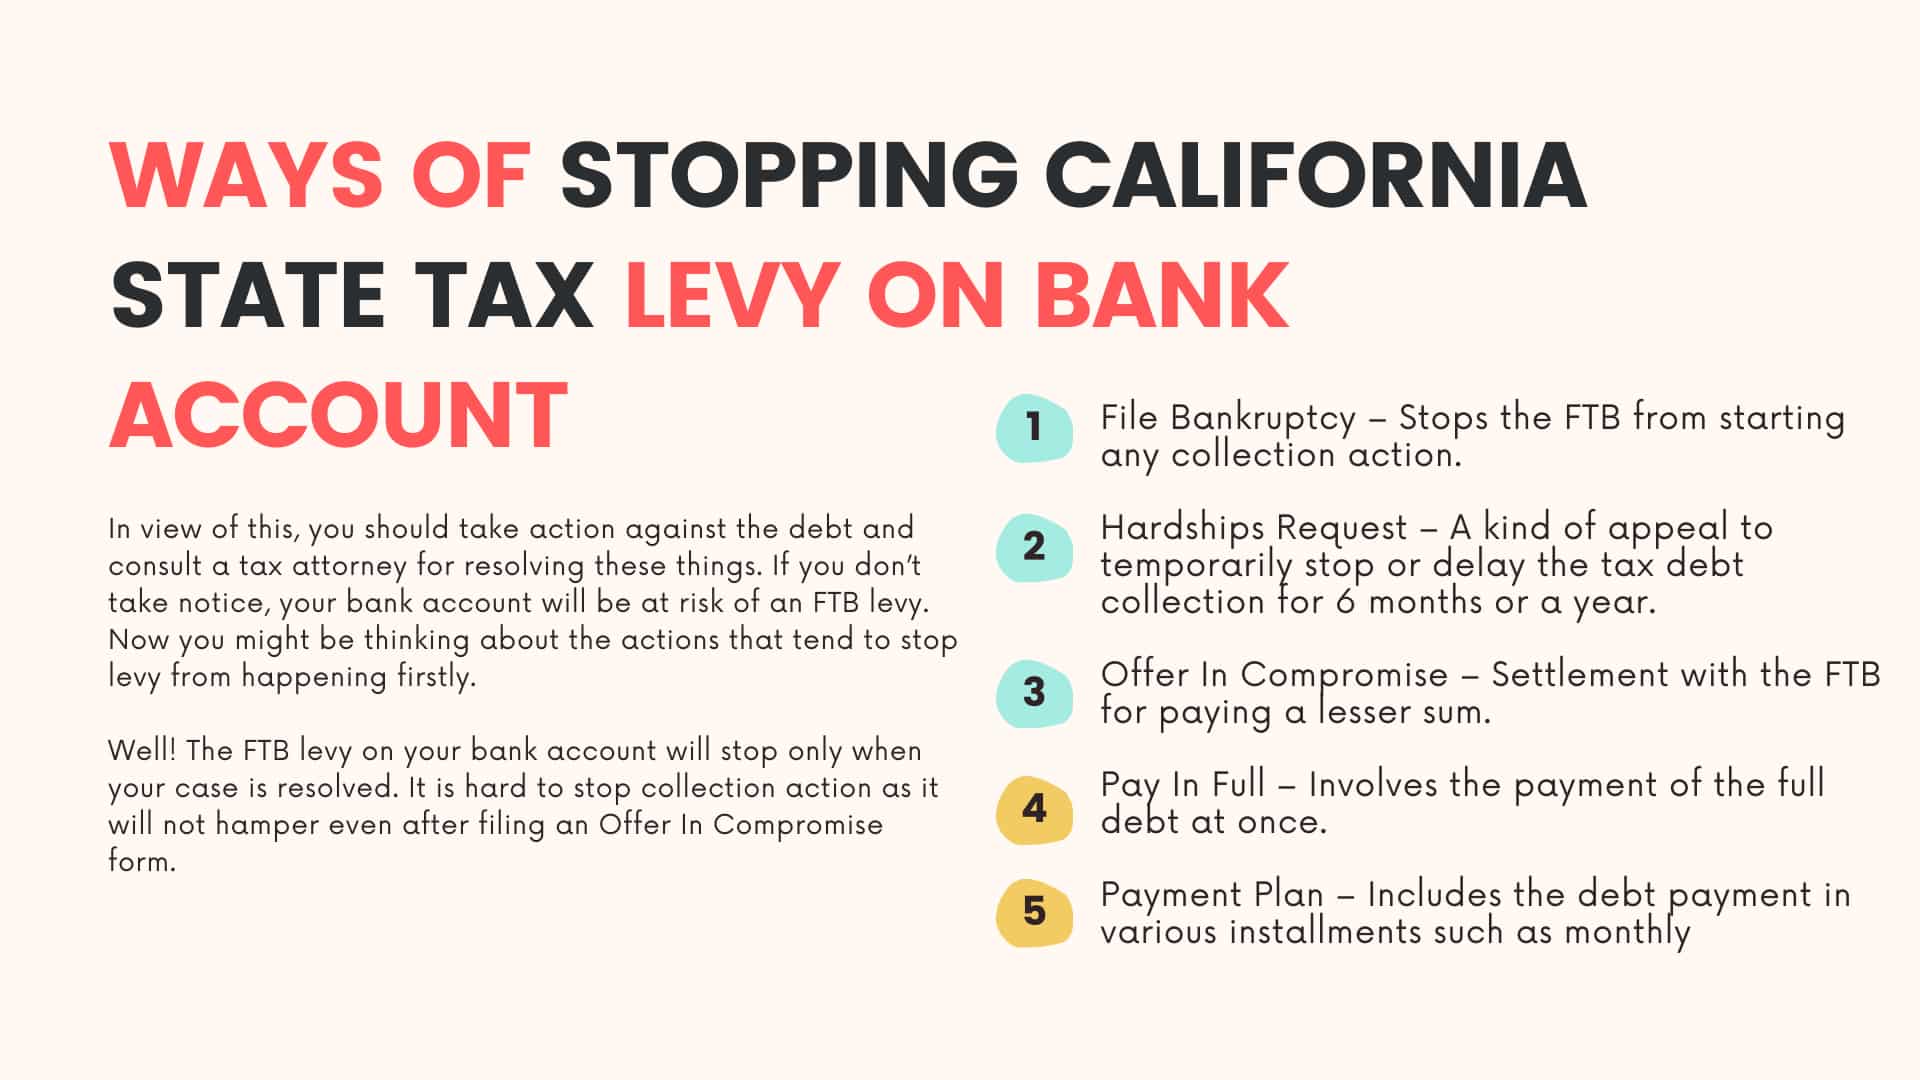 Ways of Stopping California State Tax Levy on Bank Account